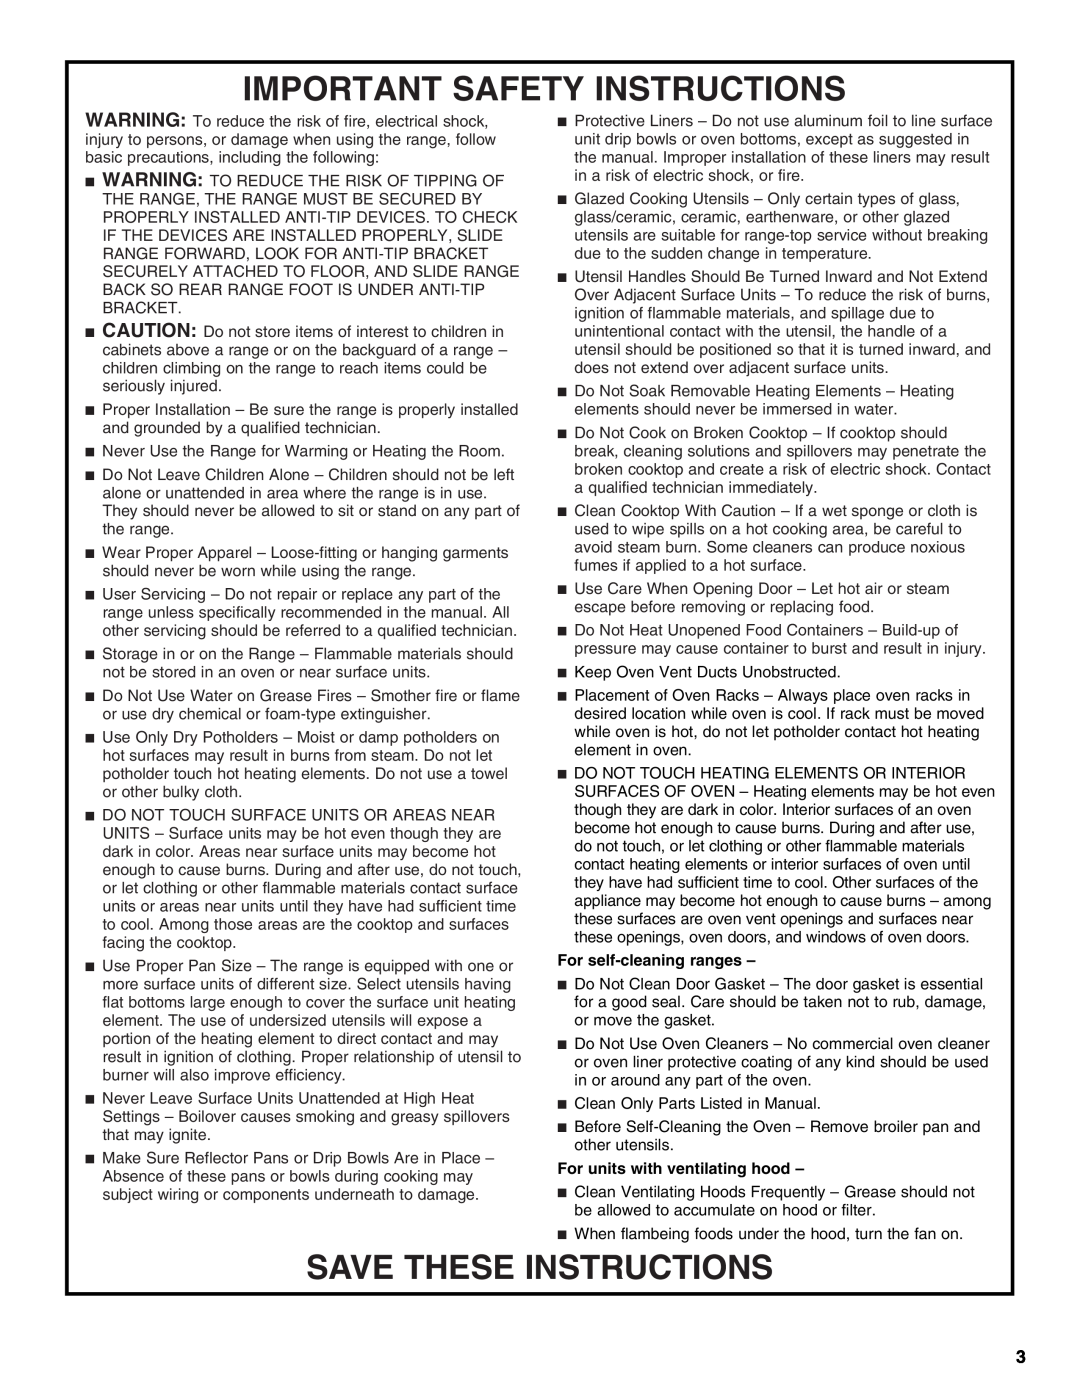 Amana W103209878 warranty Important Safety Instructions, Save These Instructions, For self-cleaningranges 